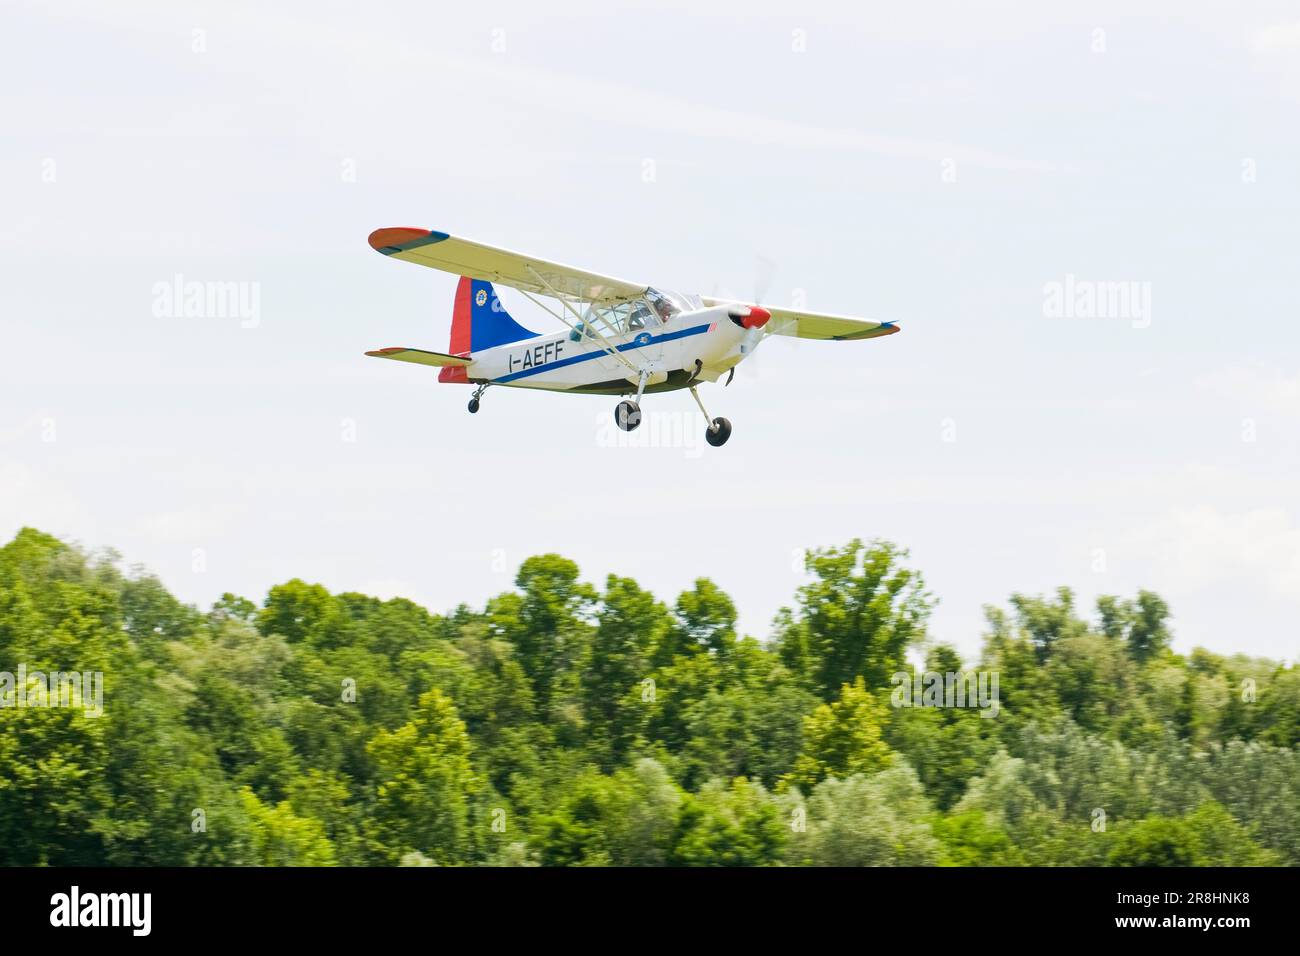 Airplane. Gliders Airport Adele Orsi. Varese. Lombardy. Italy Stock Photo